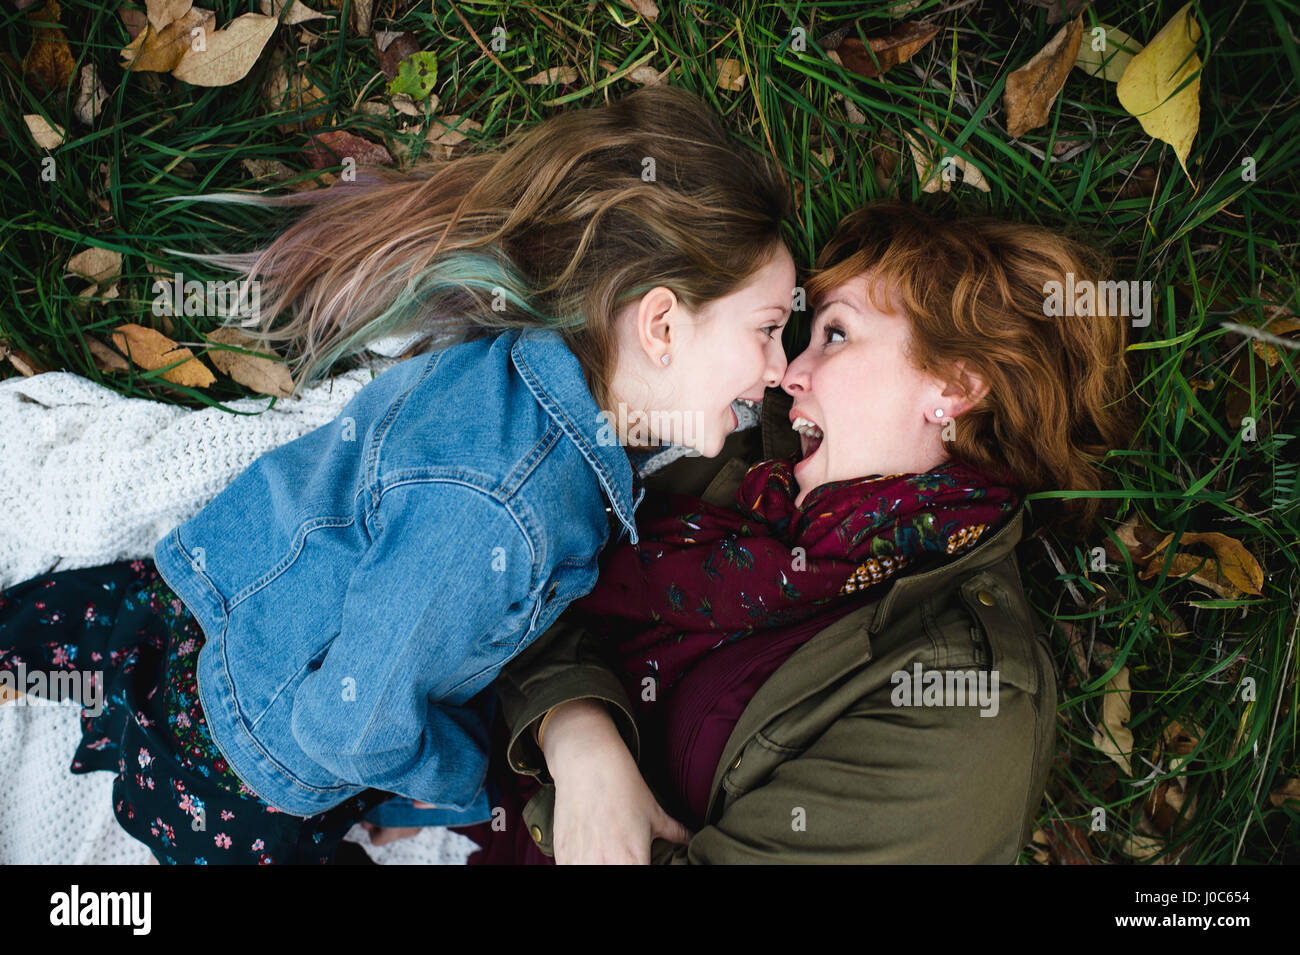 Mother and daughter lying on grass making funny faces Stock Photo